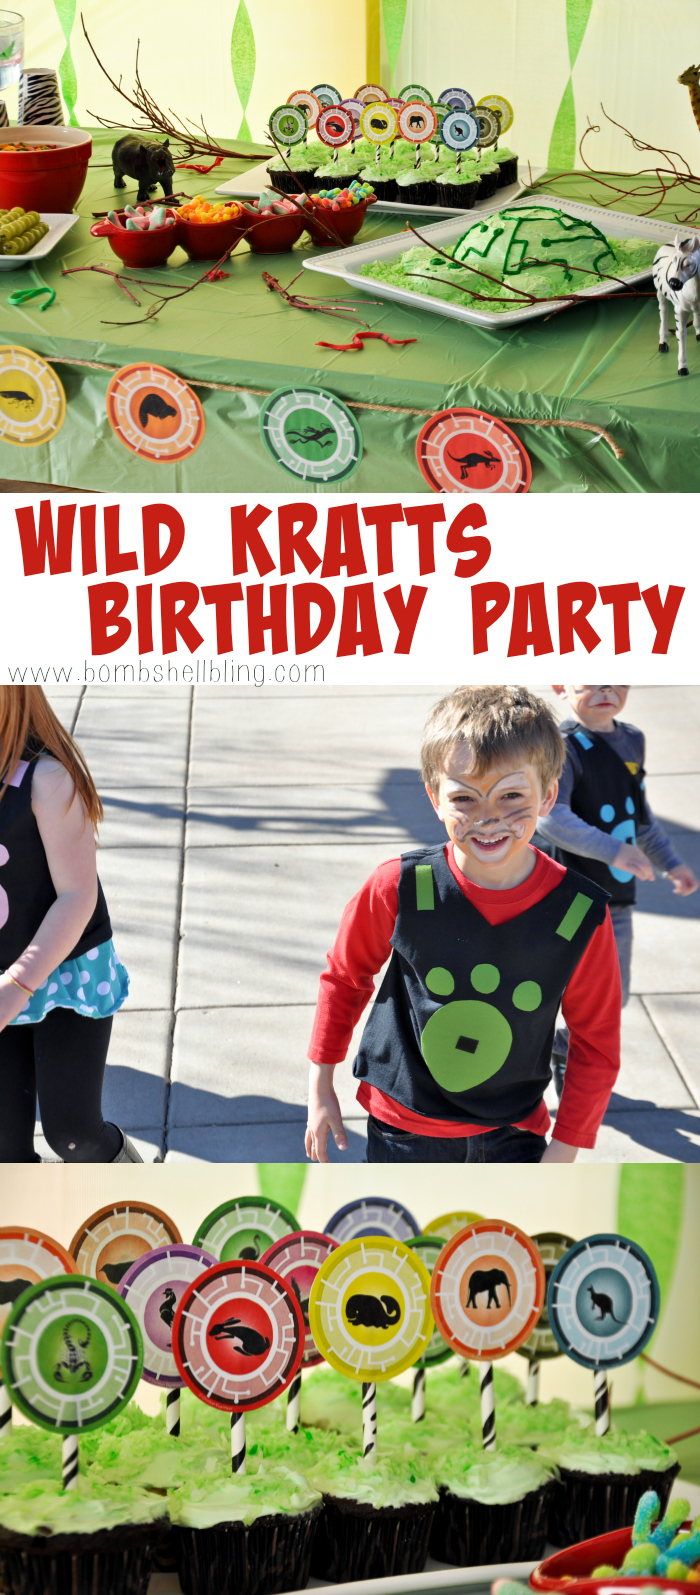 This Wild Kratts birthday party is THE CUTEST!!!